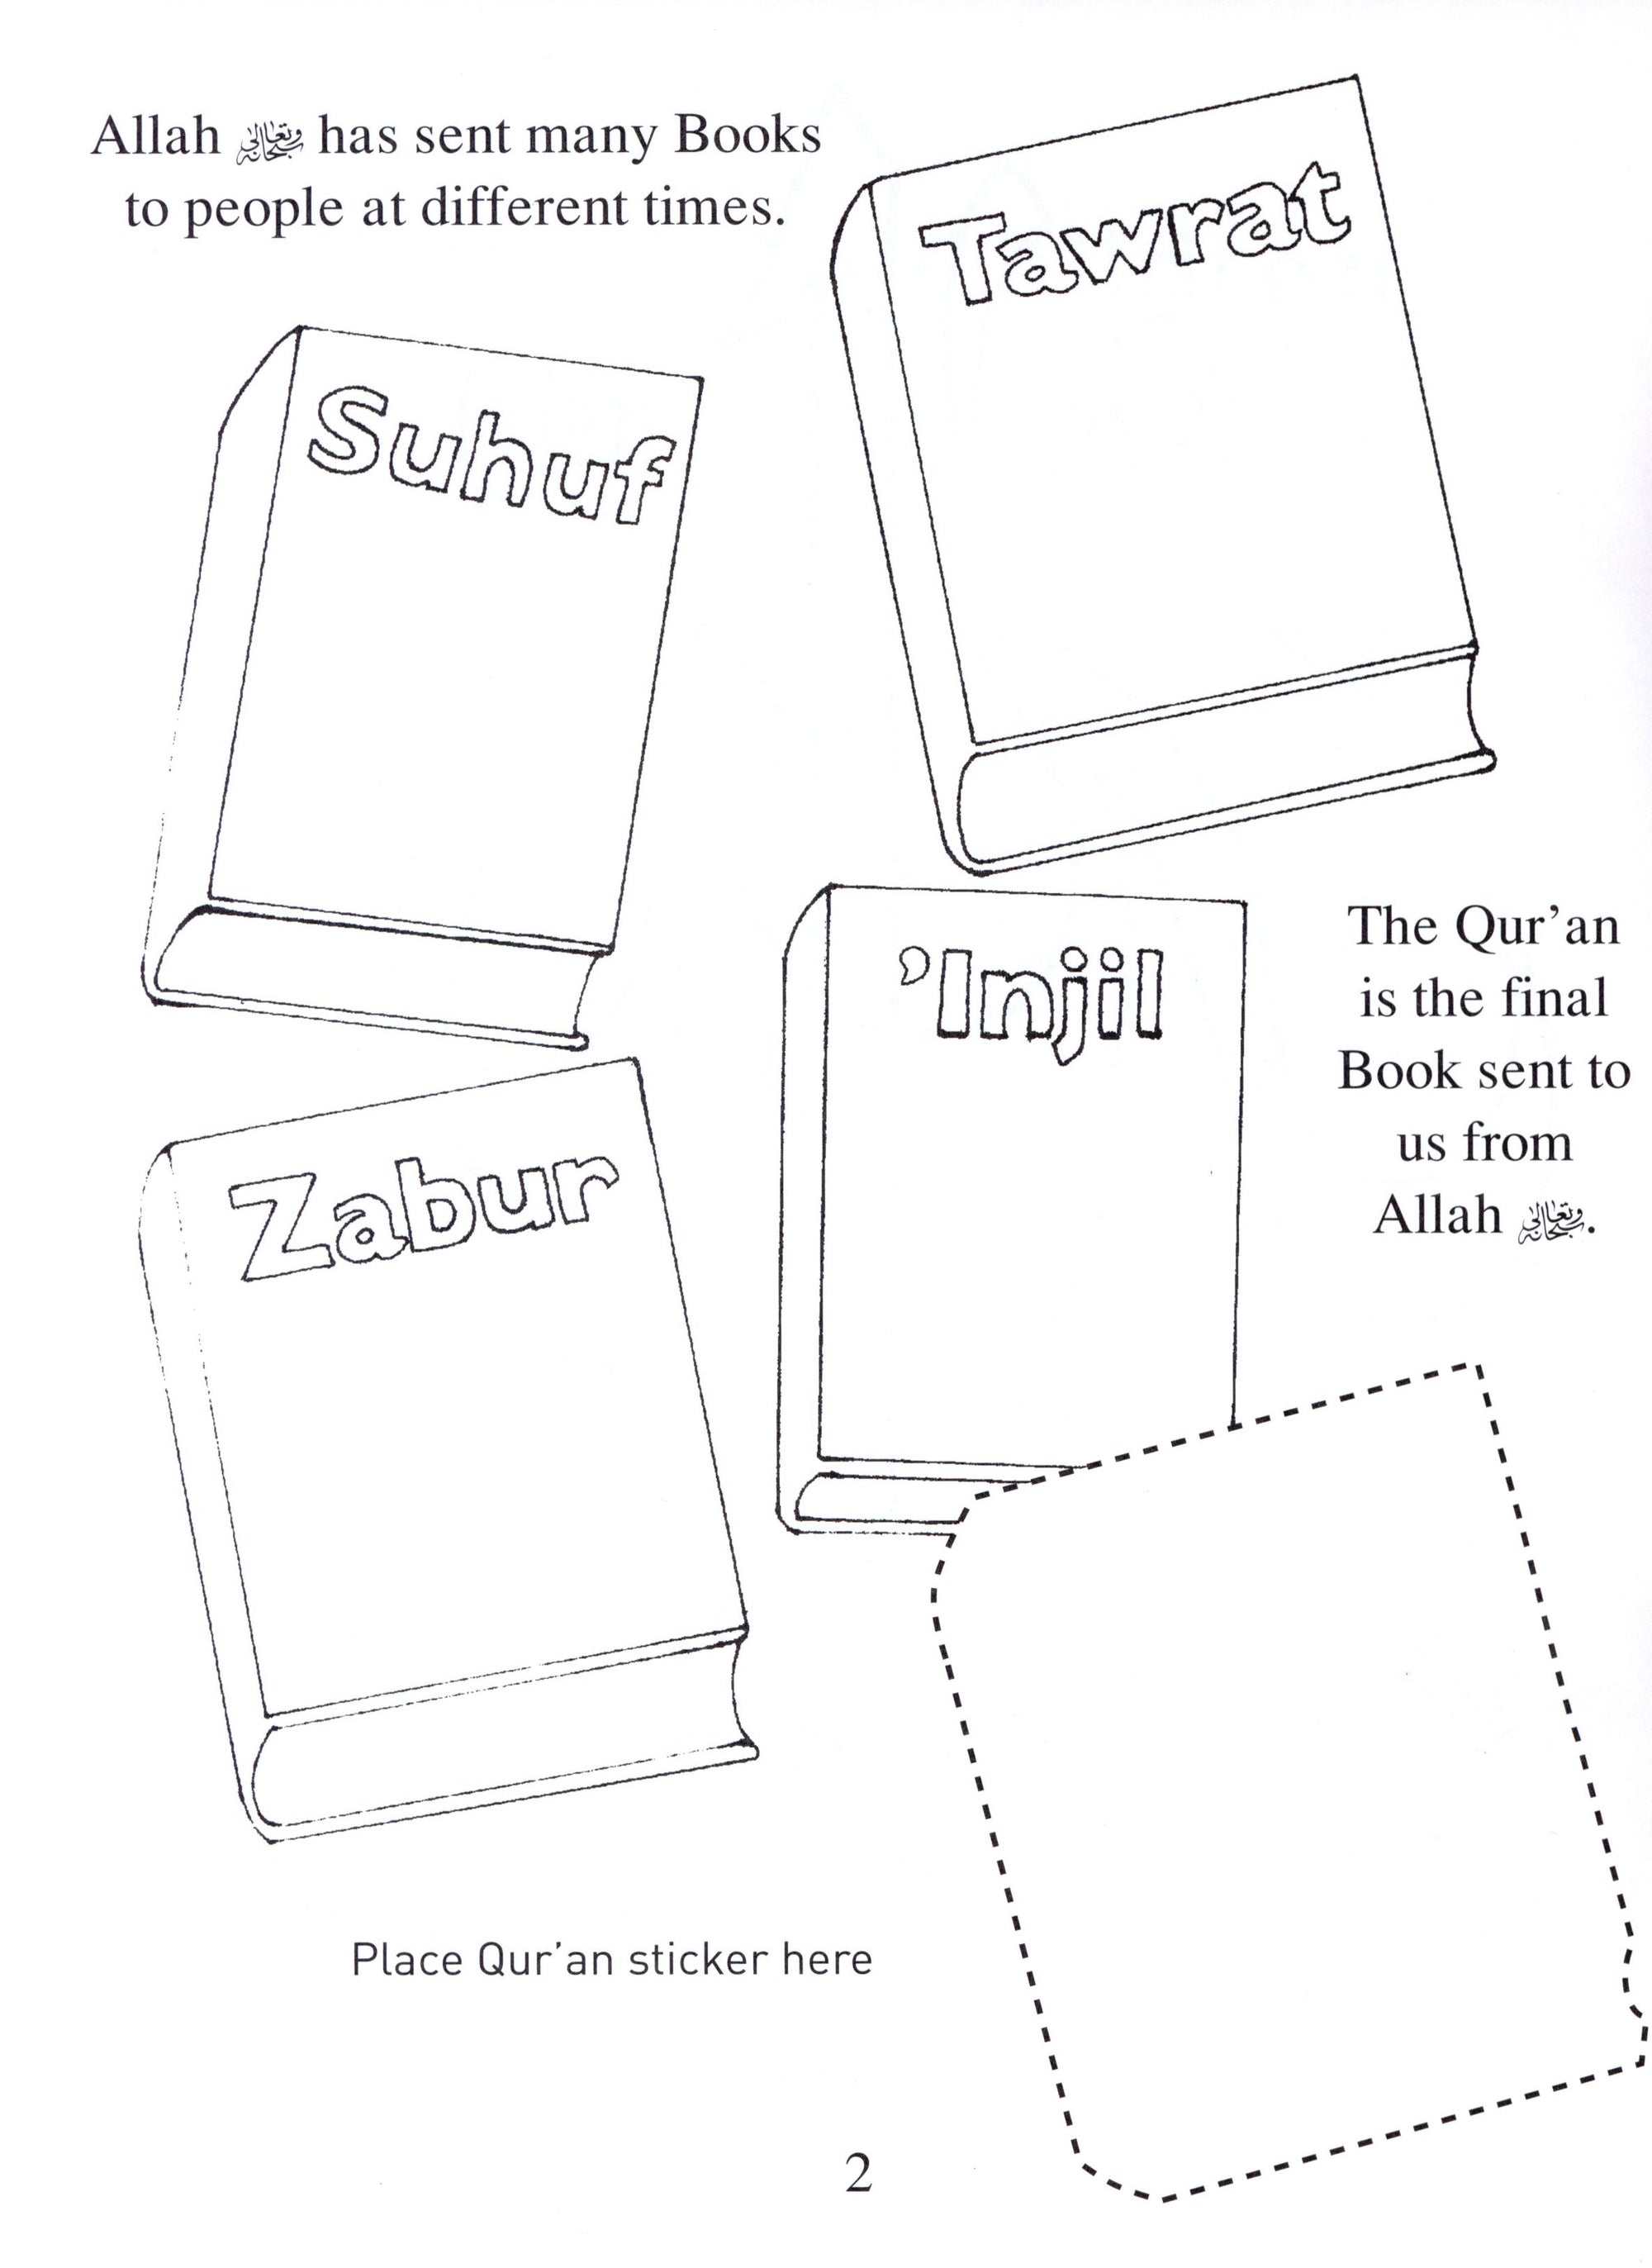 Let's Learn from the Holy Qur'an Coloring Book